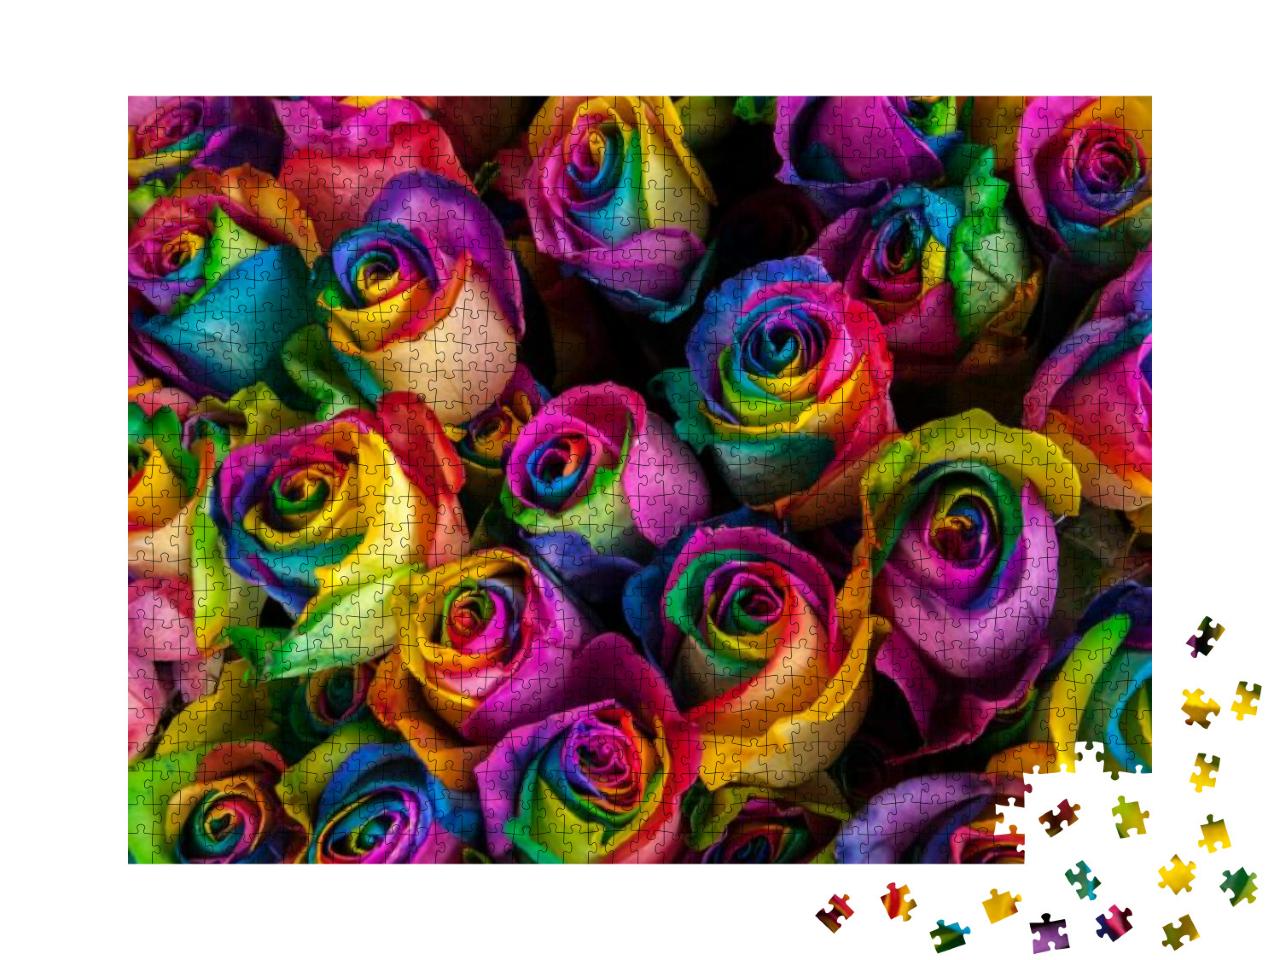 Colorful, Vibrant Rainbow Roses for Sale At an Outdoor Ma... Jigsaw Puzzle with 1000 pieces